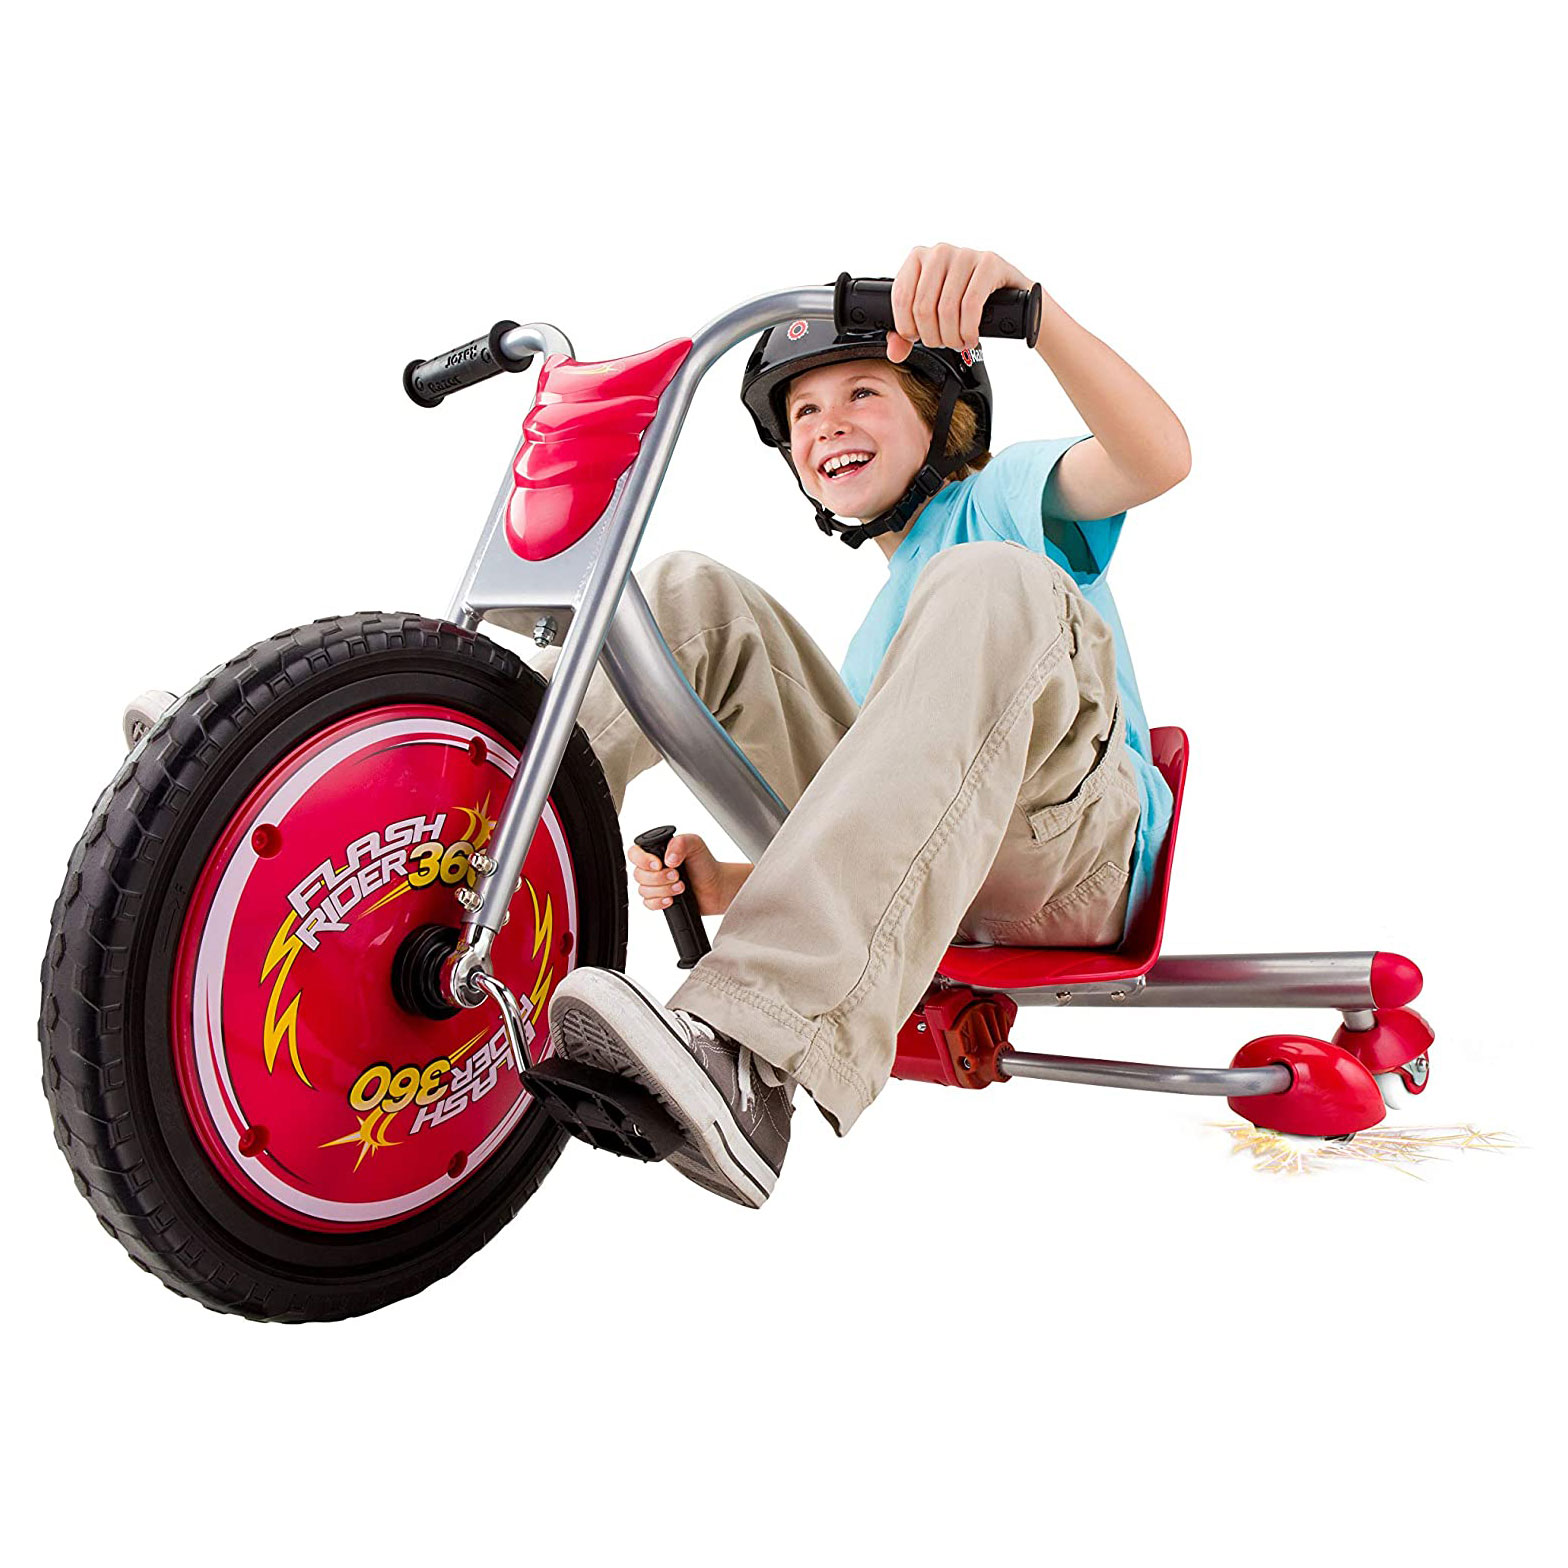 Razor FlashRider 360 Tricycle with Sparks - Red, 16" Front Wheel, Ride-On Trike Toy for Kids Ages 6+ - image 3 of 6